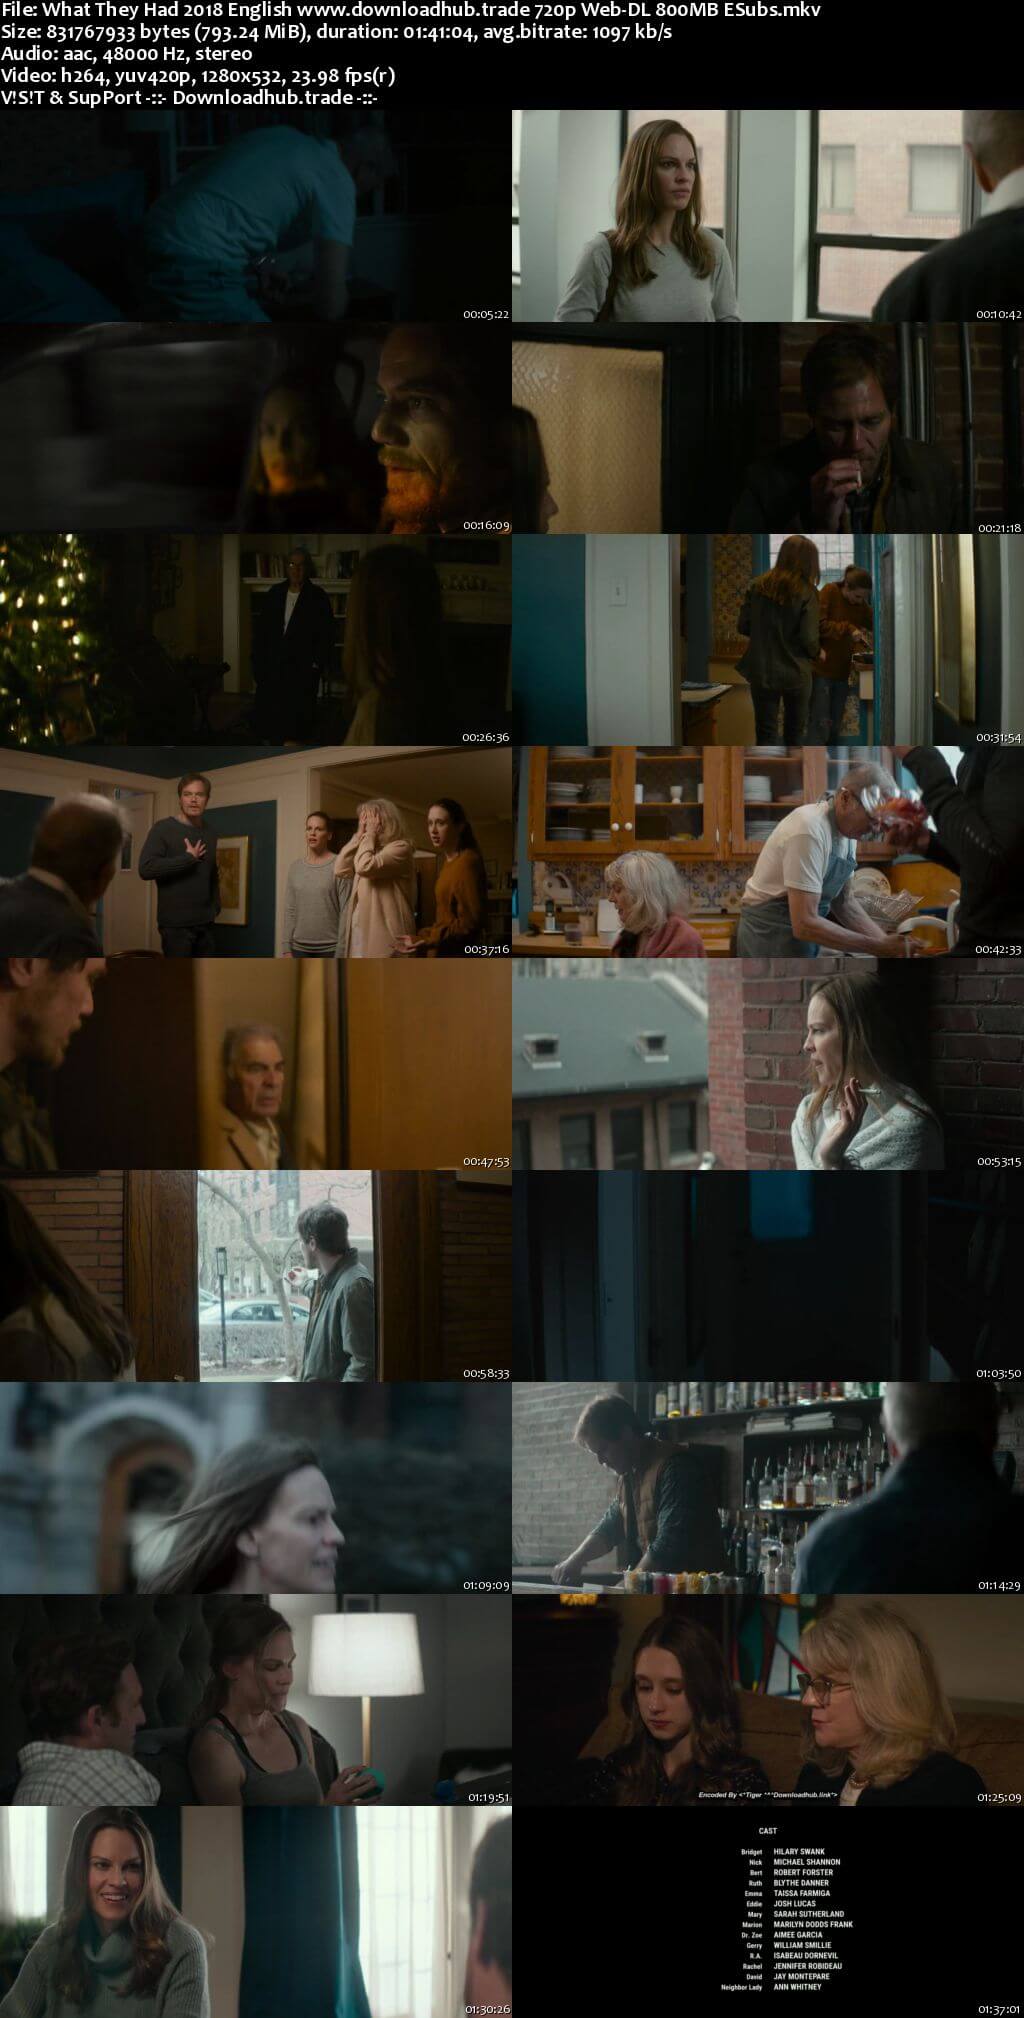 What They Had 2018 English 720p Web-DL 800MB ESubs